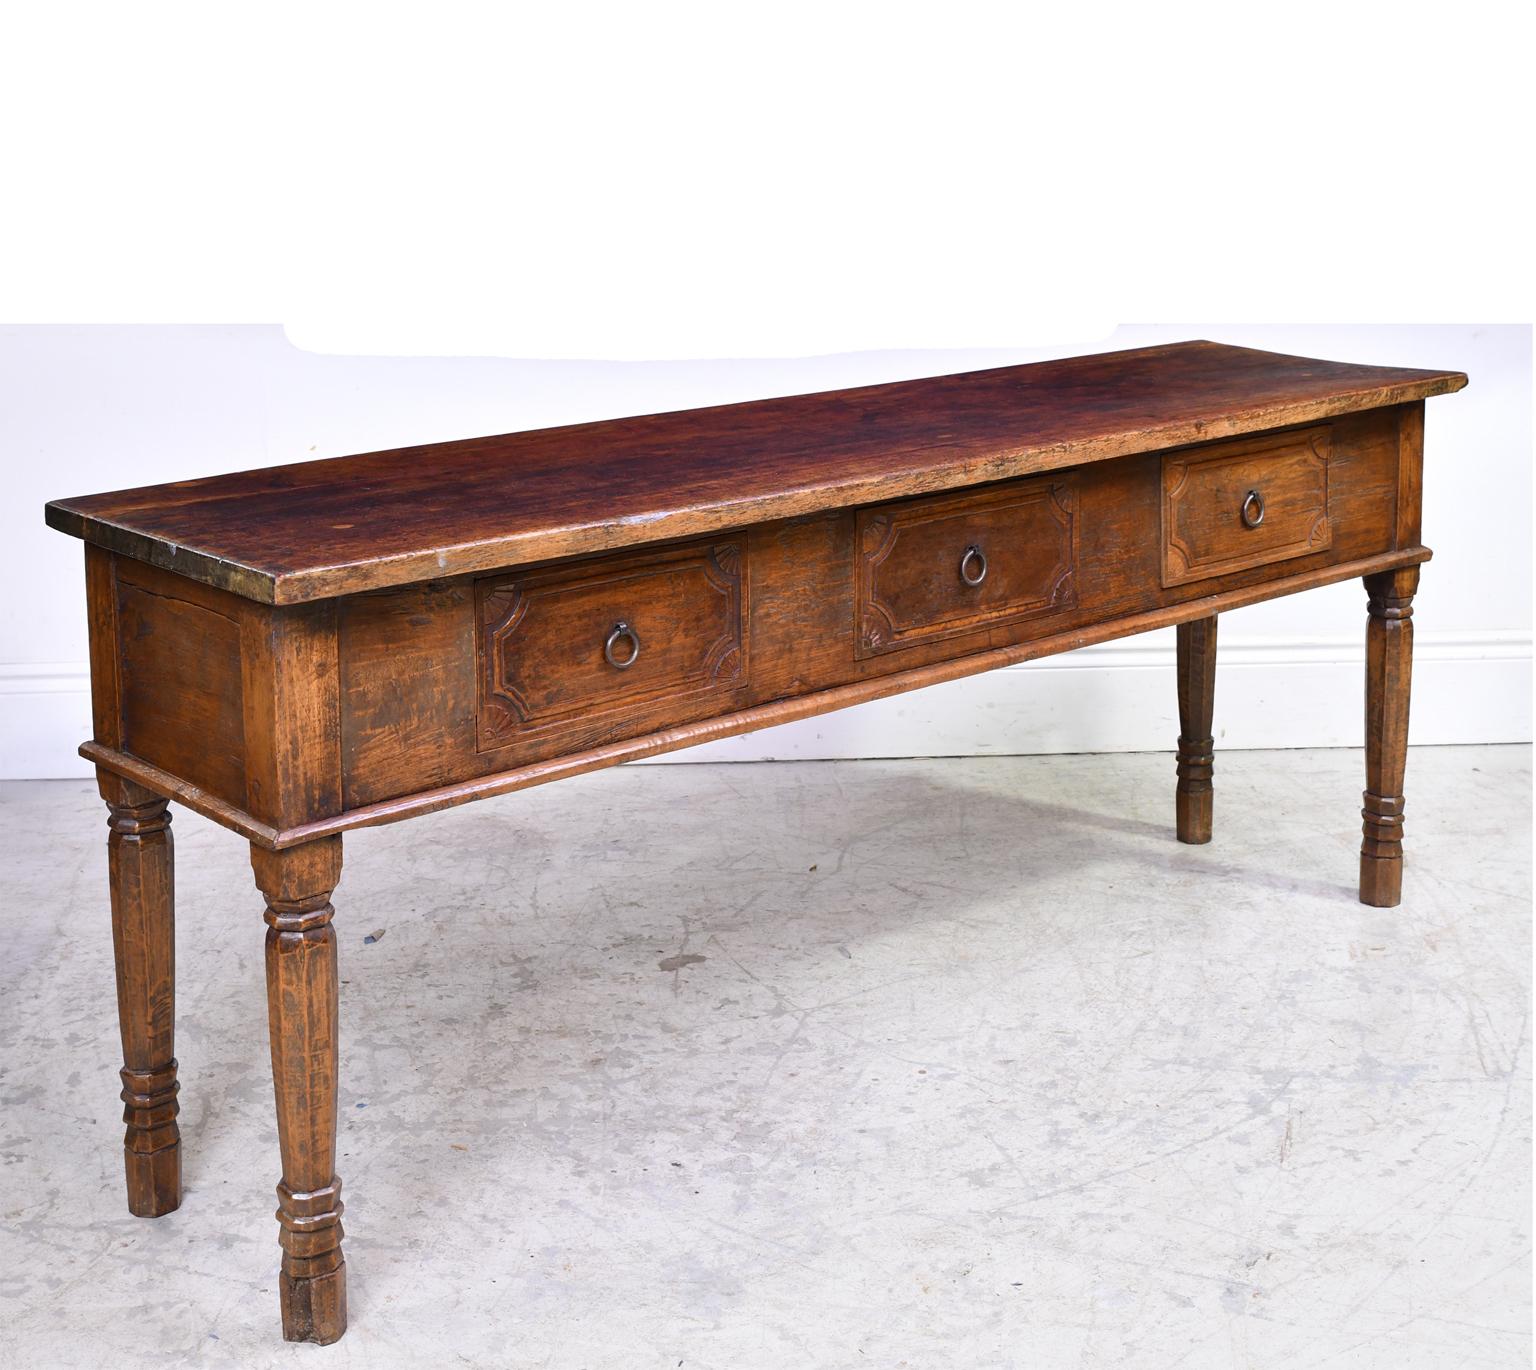 Turned 19th Century Dutch East Indies Farmhouse Table or Sideboard in Teak with Drawers